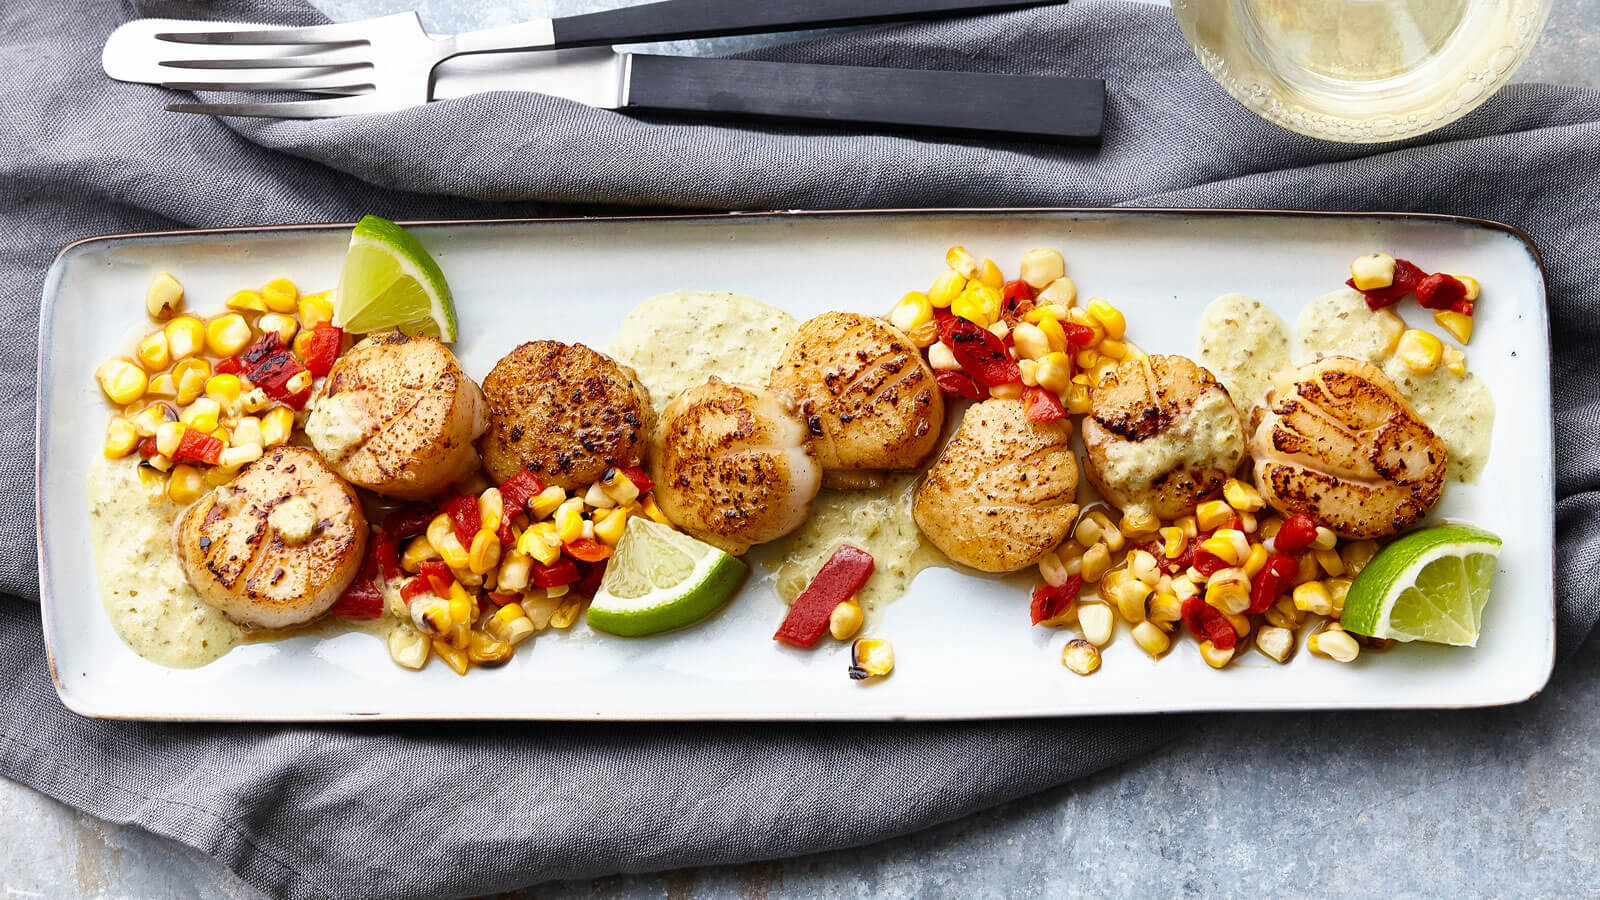 Pan Fried Scallops with Roasted Corn & Hatch Chile Cream Sauce